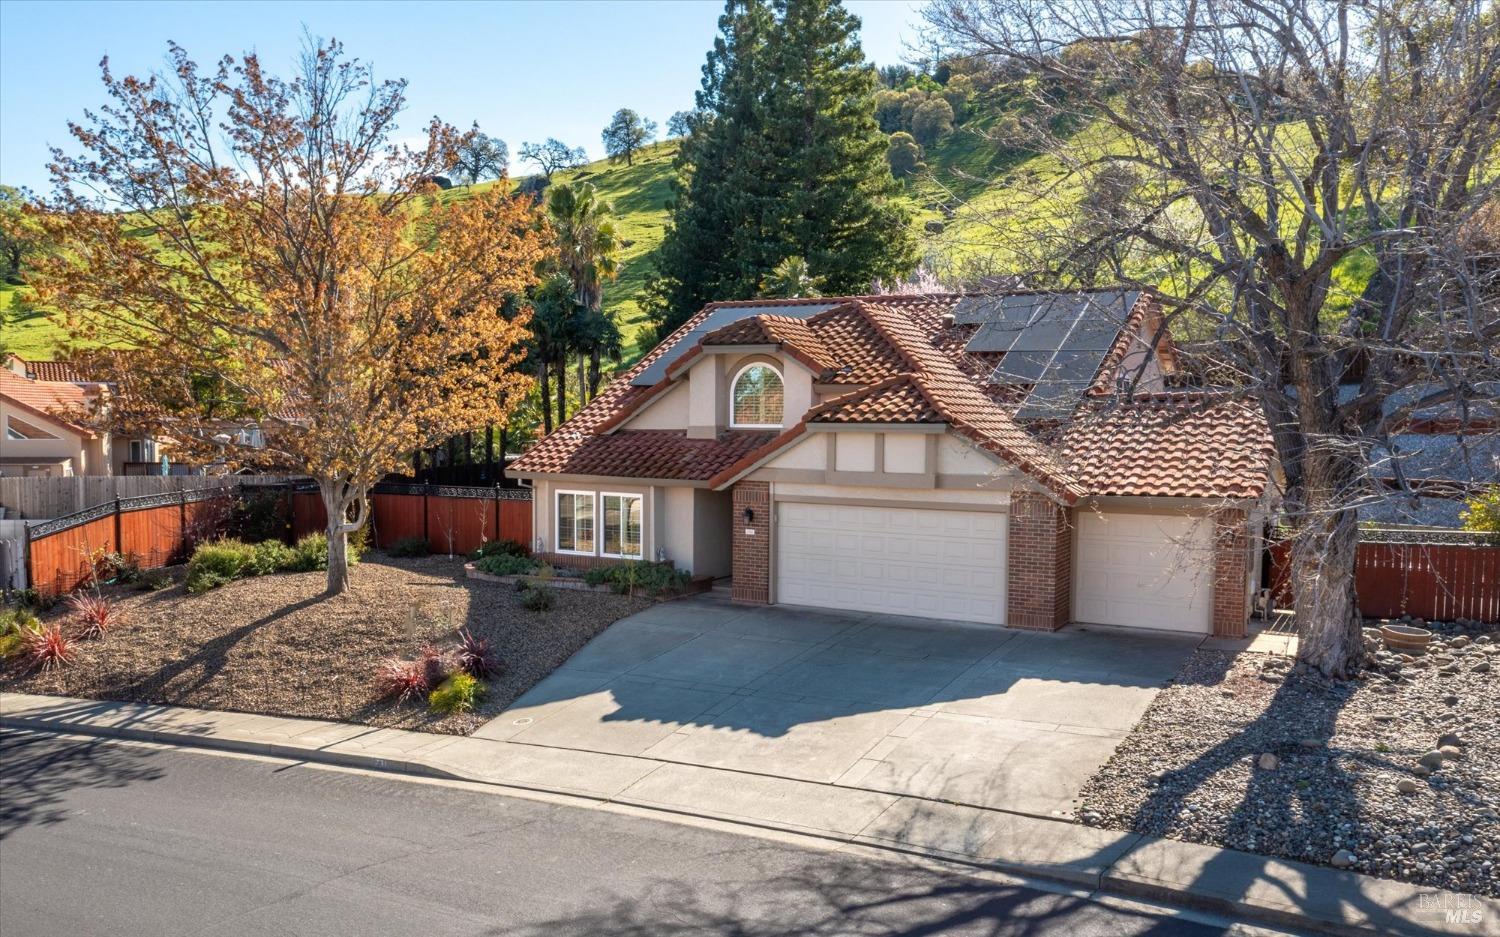 Photo of 731 Rambleton Dr in Vacaville, CA